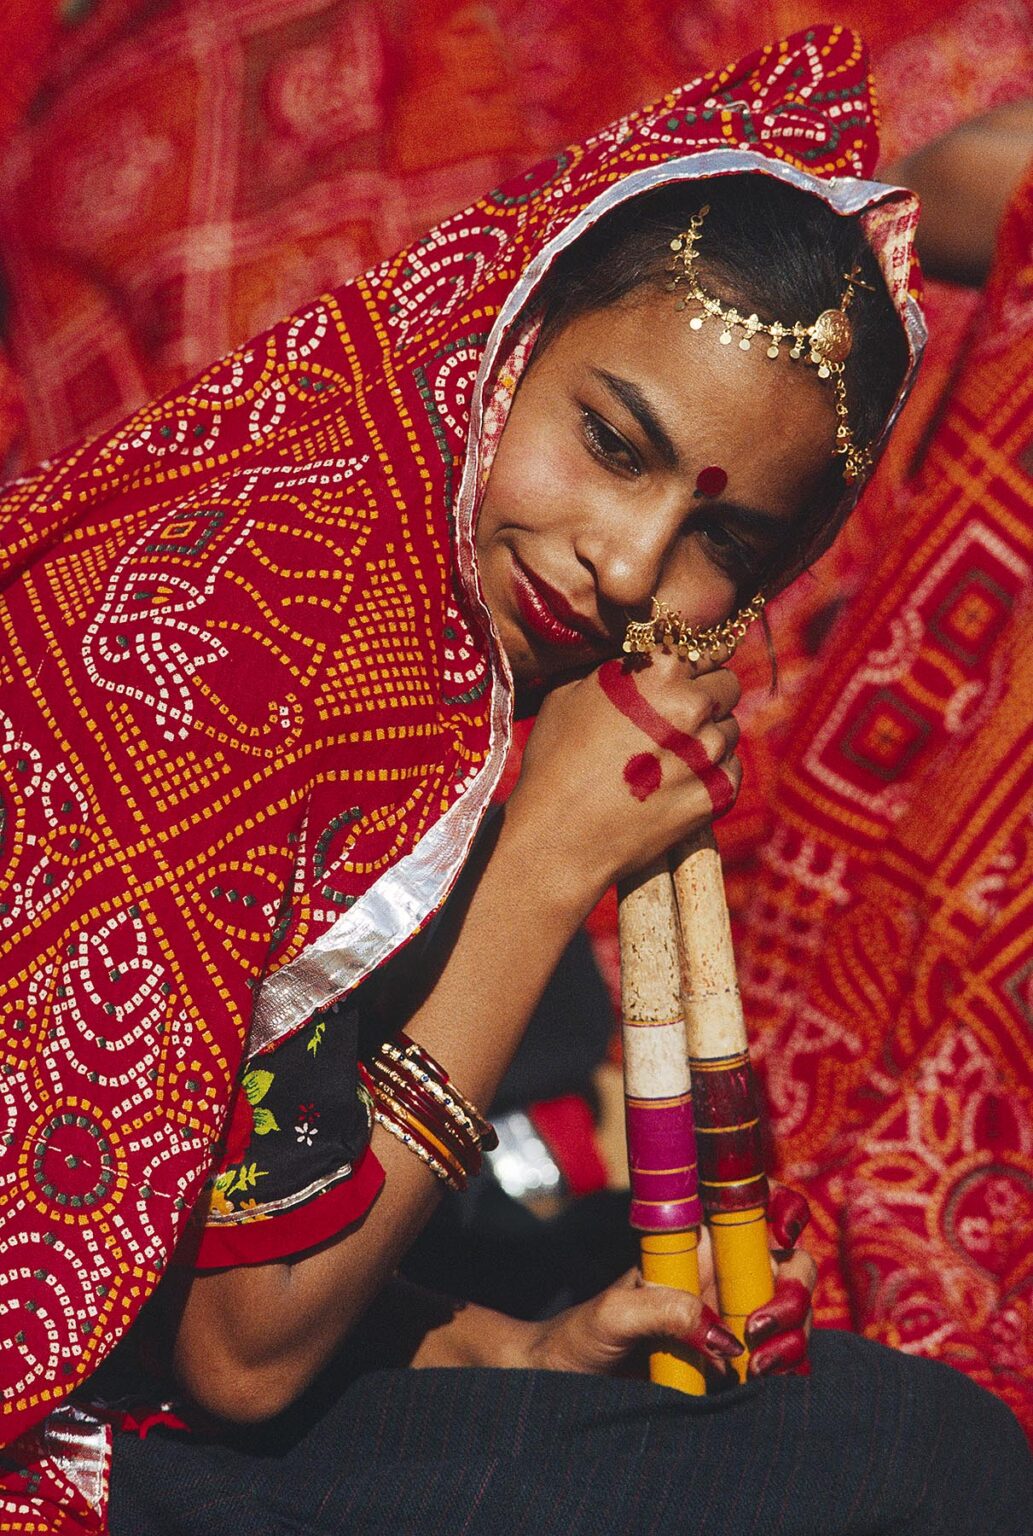 Portrait of a RAJASTHANI GIRL during a TRADITIONAL DANCE performance at the PUSHKAR CAMEL FAIR - RAJASTHAN, INDIA